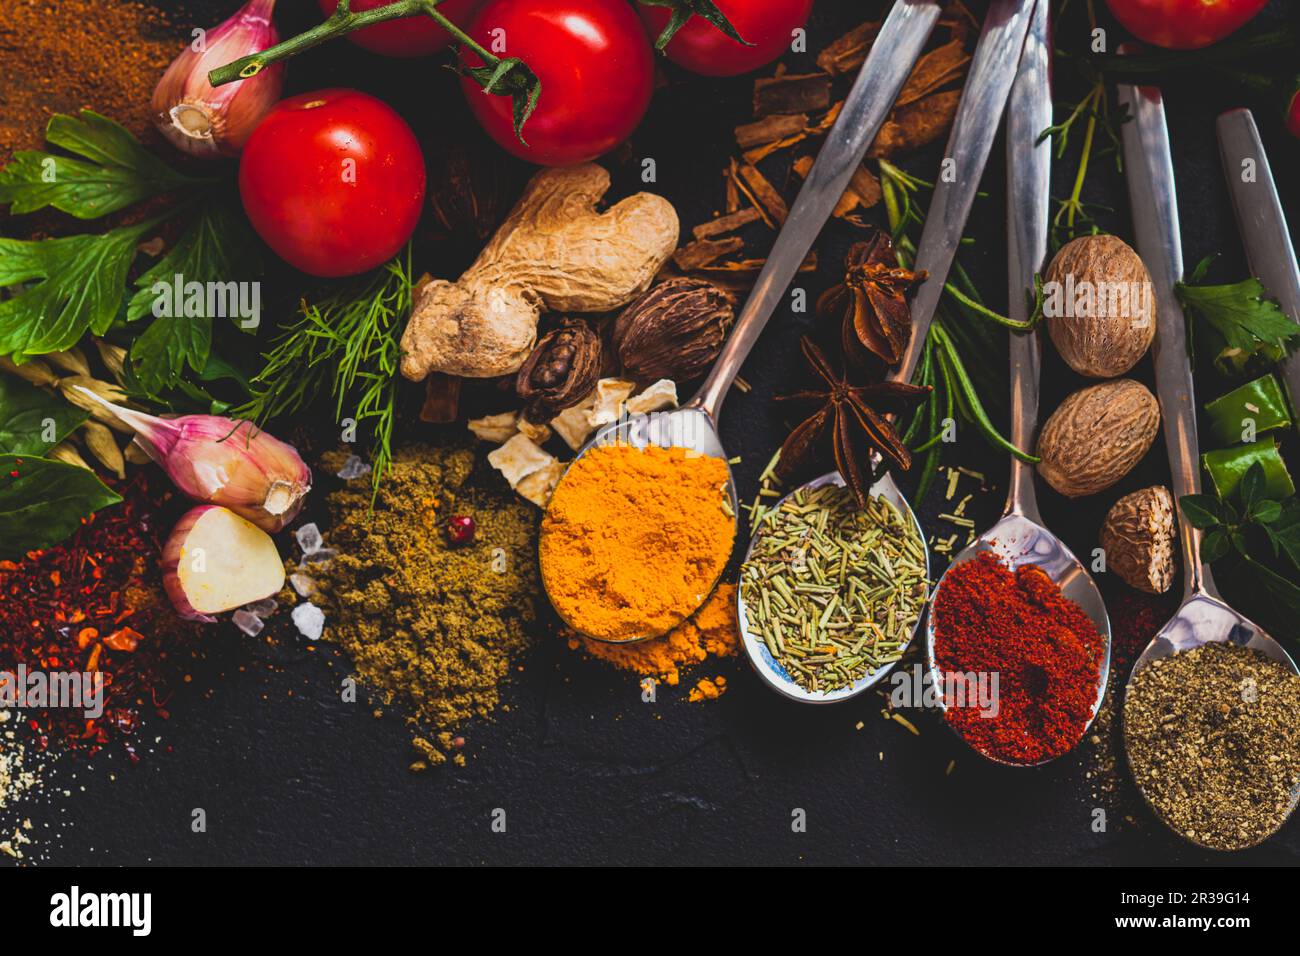 Colorful herbs and spices for cooking, close up Stock Photo